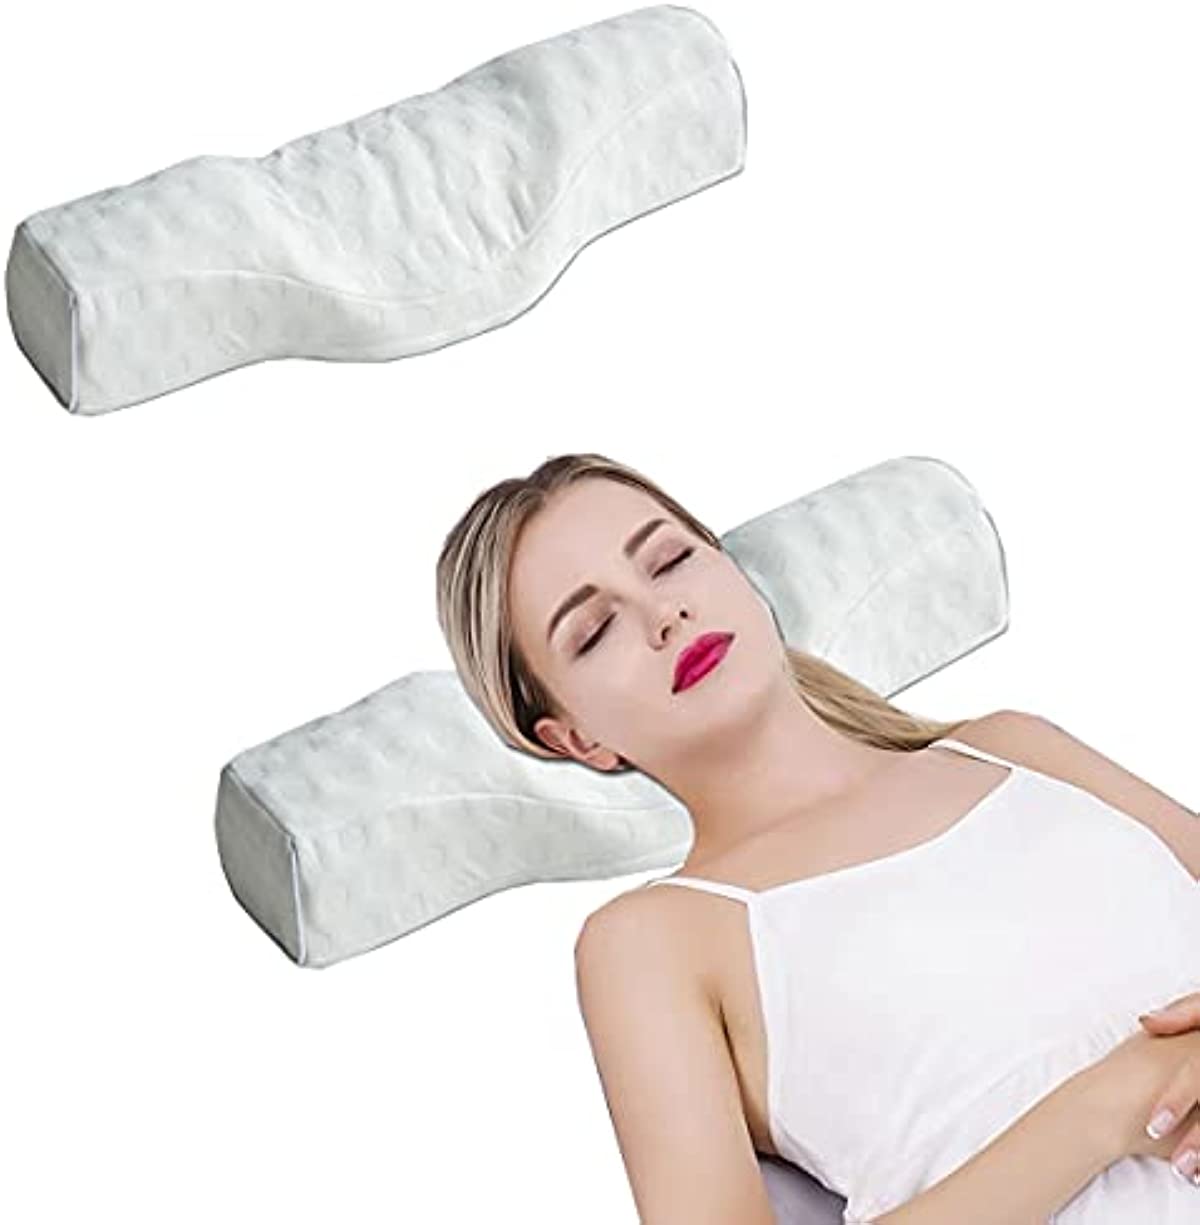 Cervical Neck Pillow for Sleeping , Memory Foam Neck Roll Pillow for Stiff Neck Pain Relief, Neck Support Pillow Bolster Pillow for Bed for Side Sleepers Back Sleeper. (White)